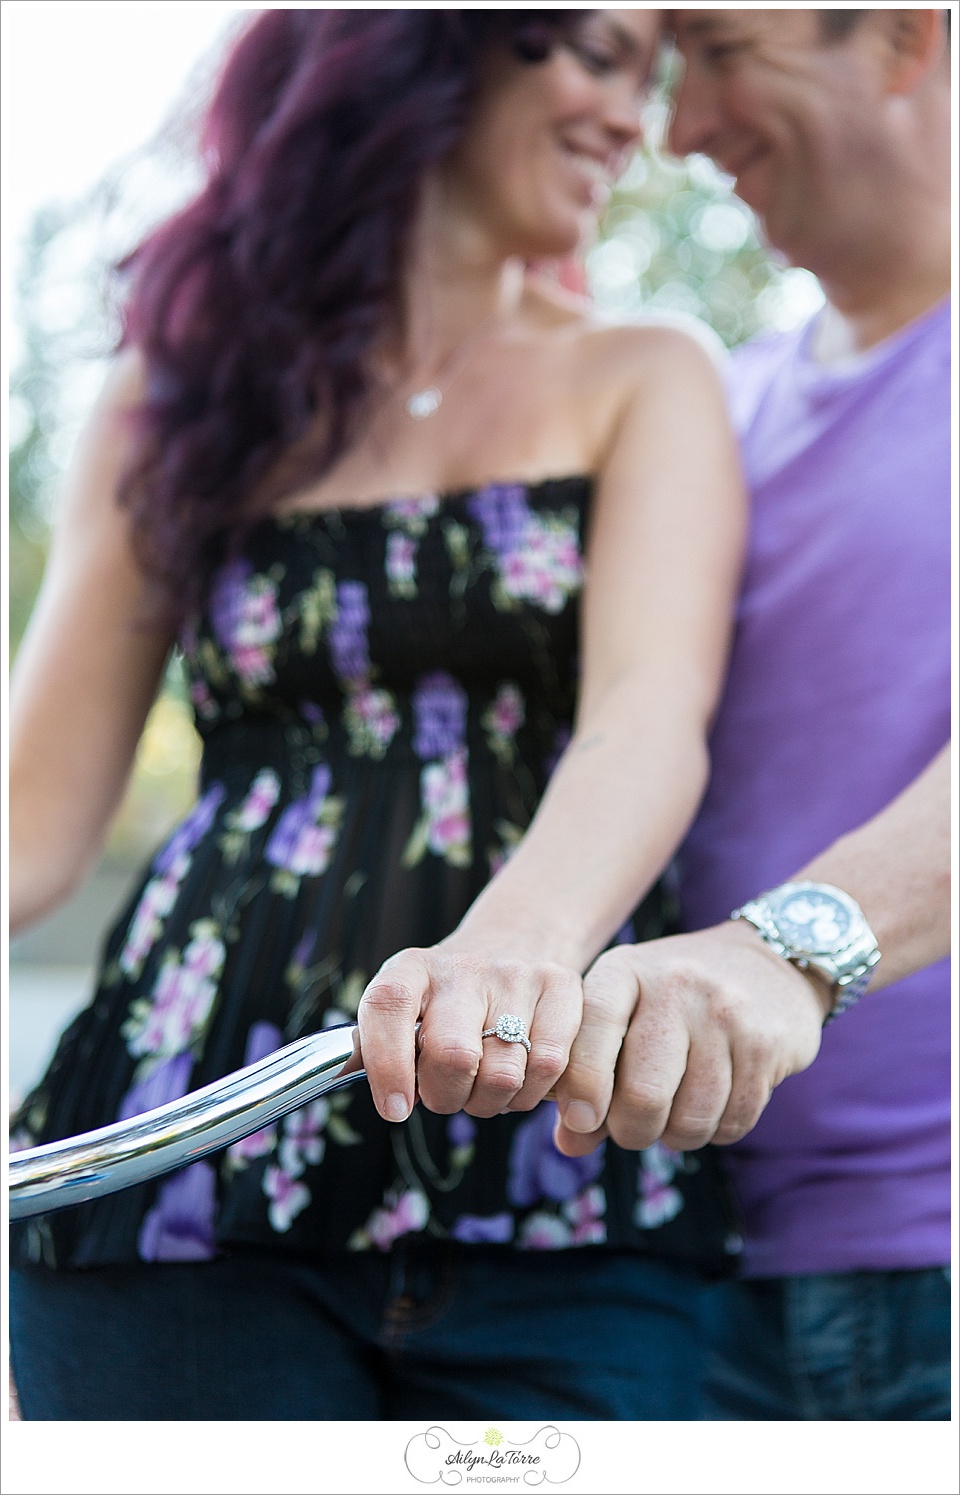 Siesta Key Engagement | Photos by Ailyn La Torre Photography © 2014